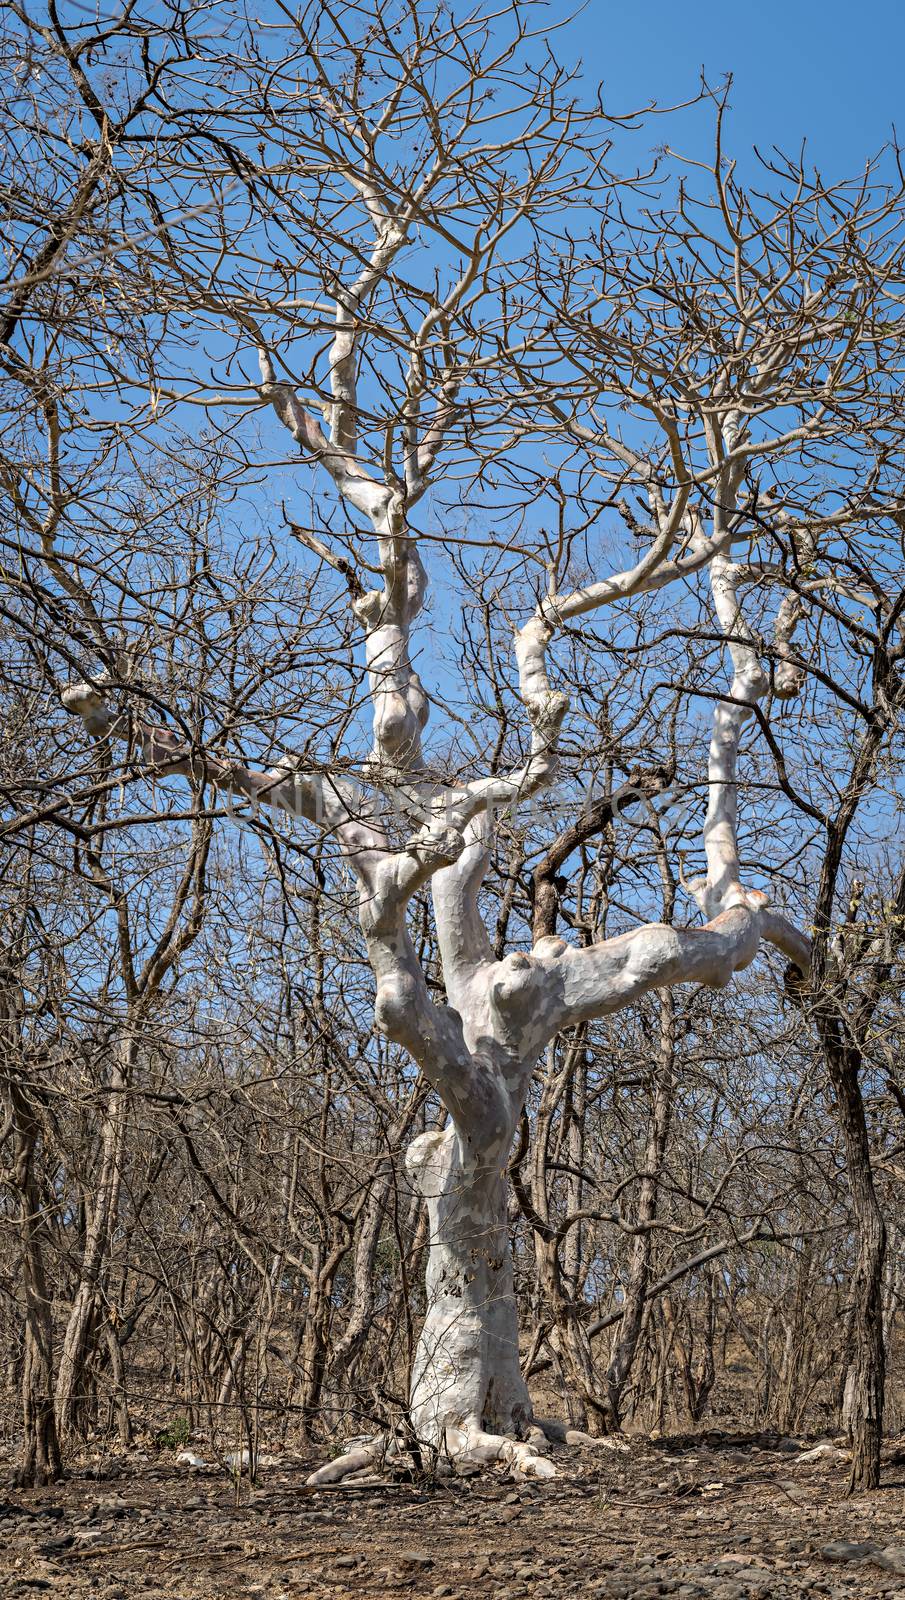 Dry gum or rubber tree at Sasan gir jungle, Gujrat, India. by lalam